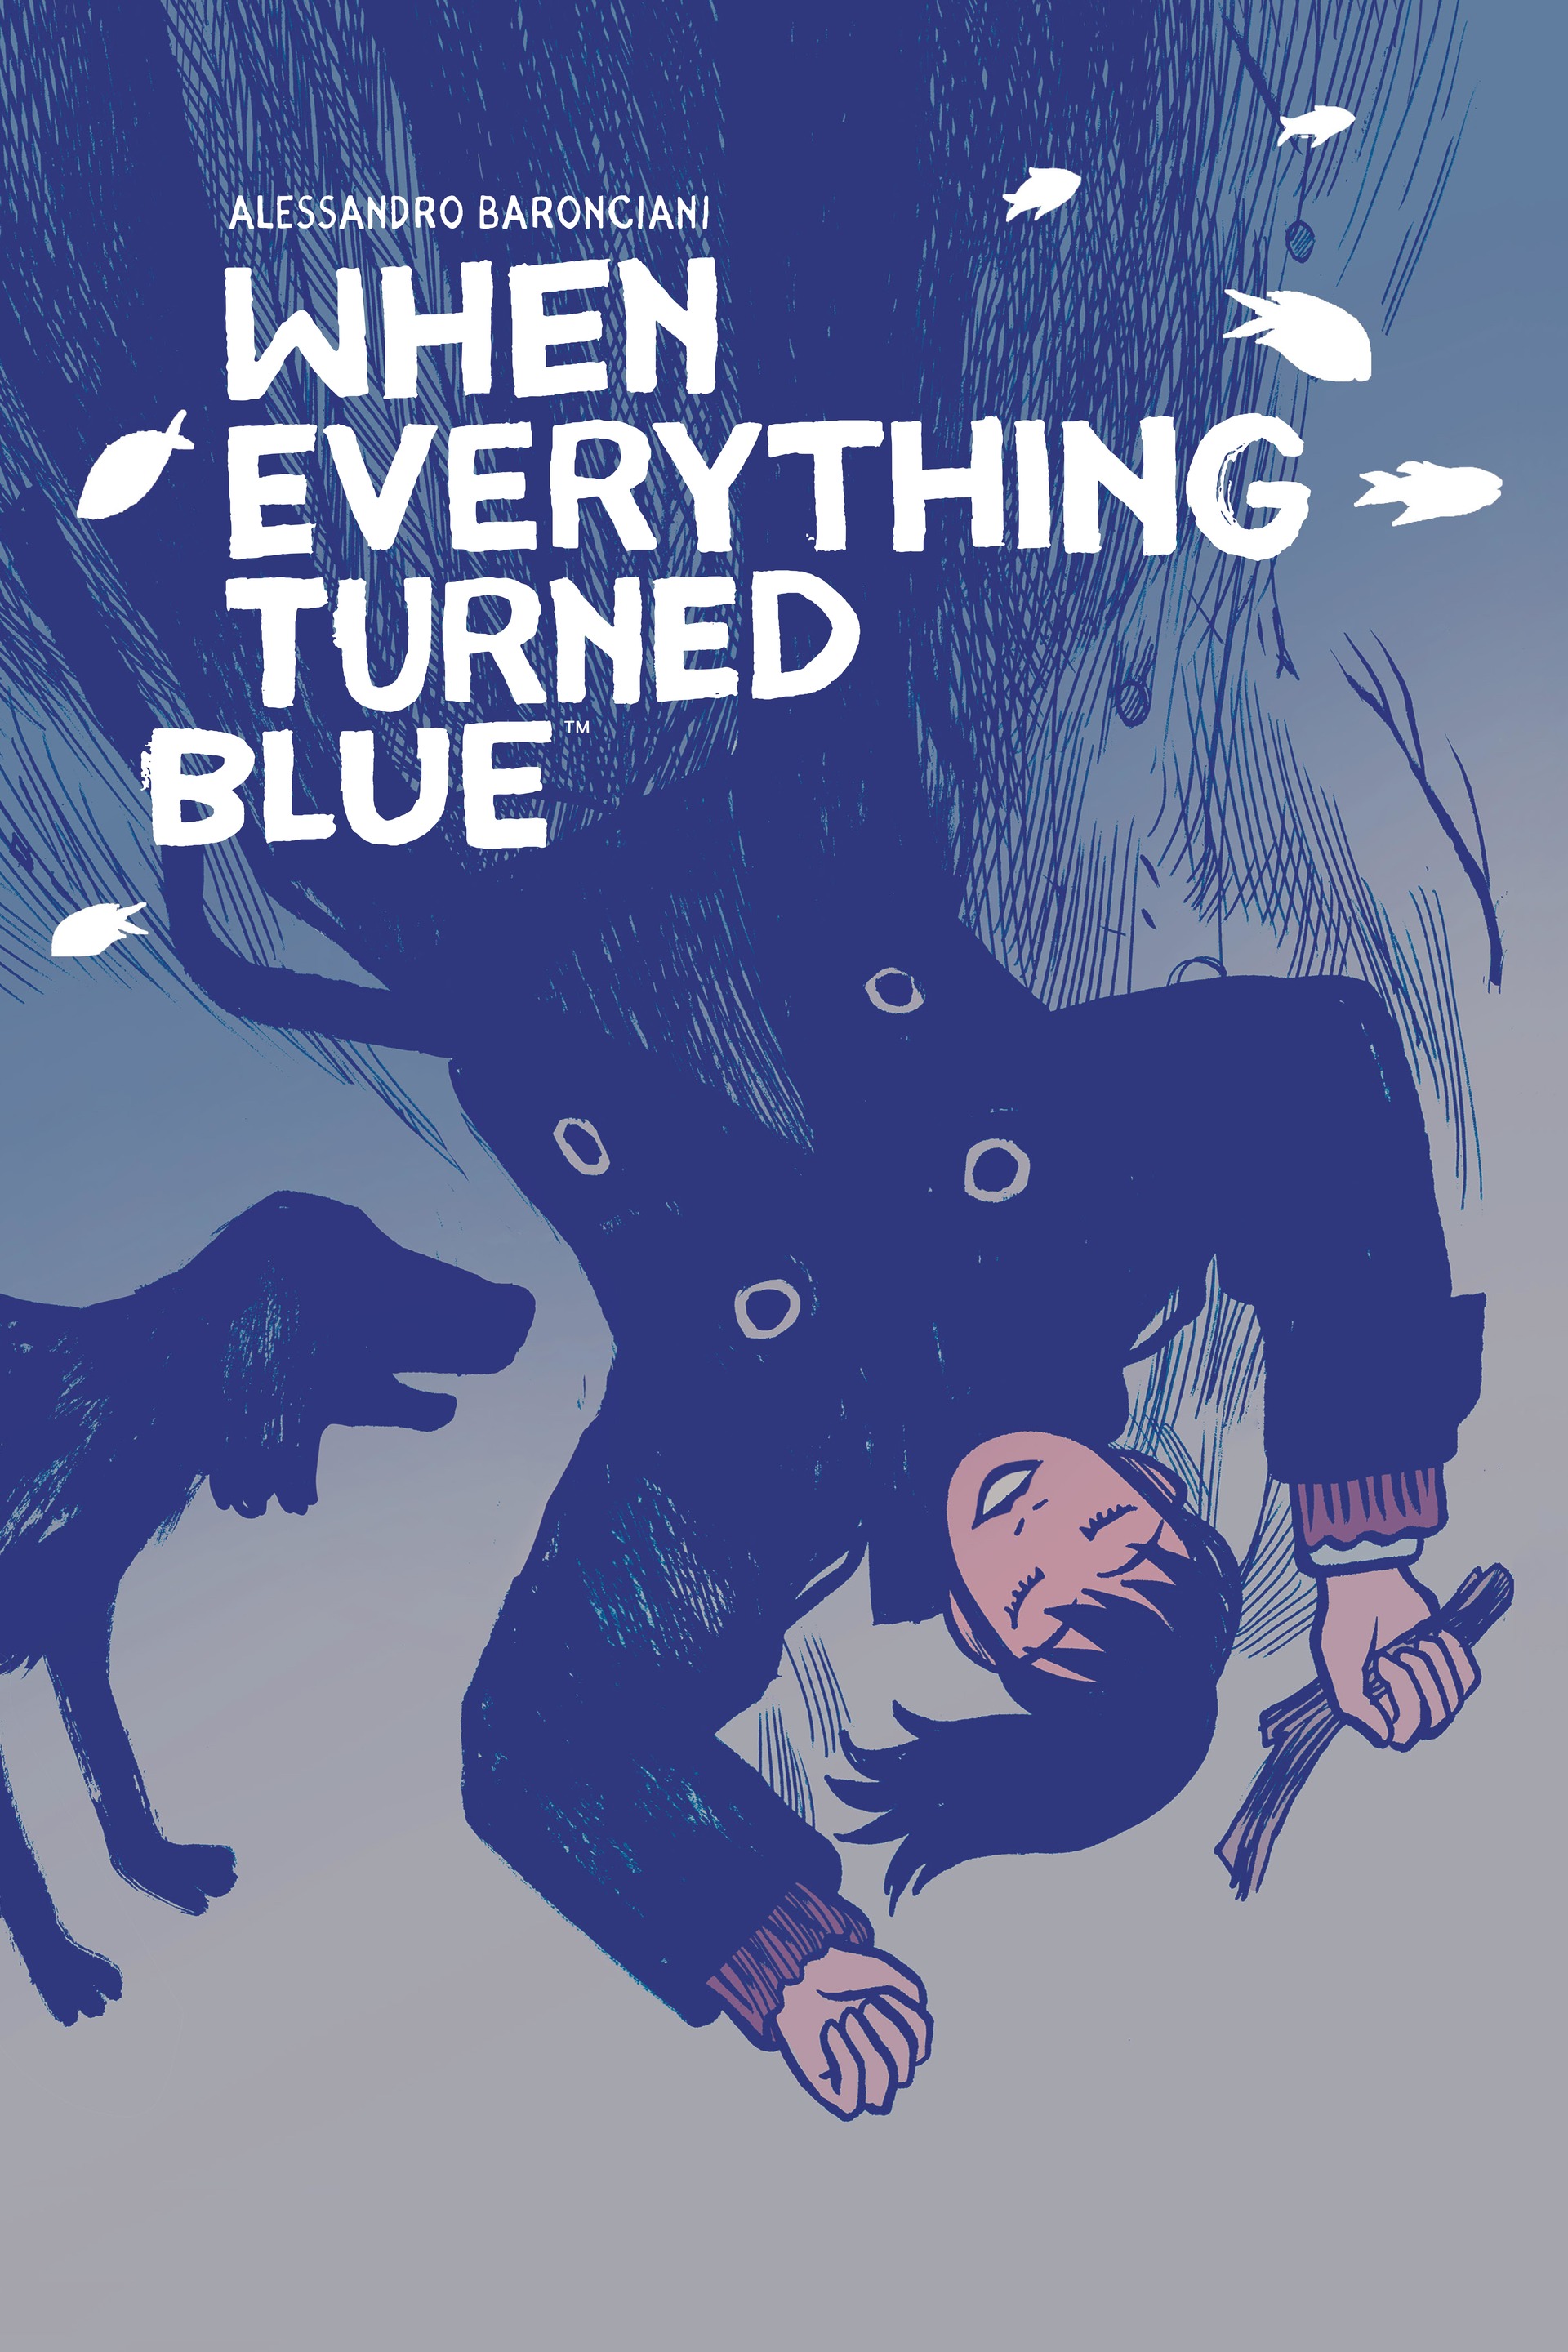 Read online When Everything Turned Blue comic -  Issue # TPB - 1